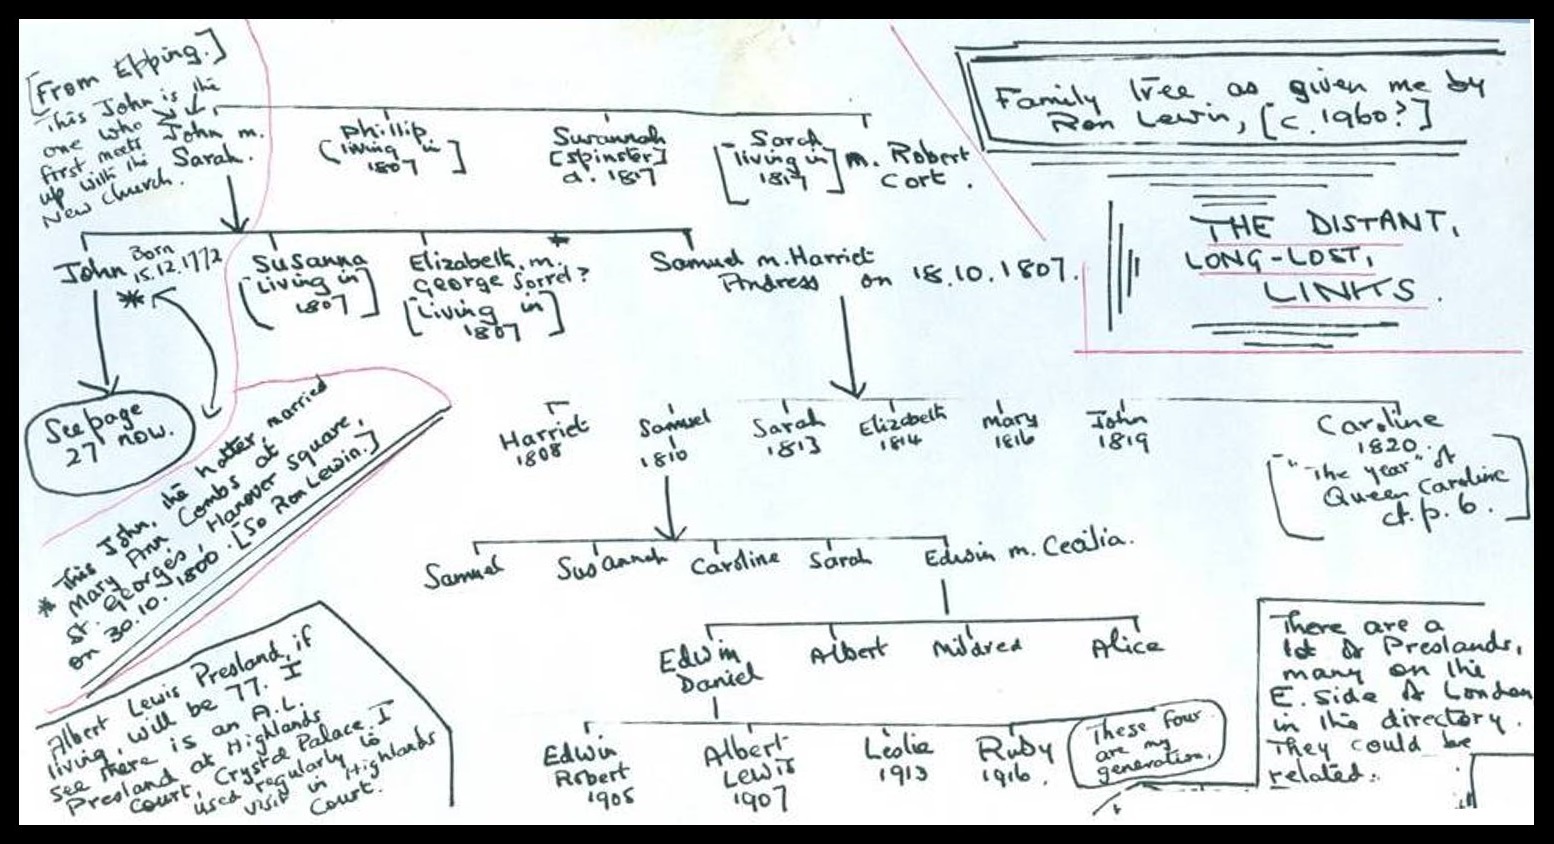 Family tree from Ron Lewin (c.1960)